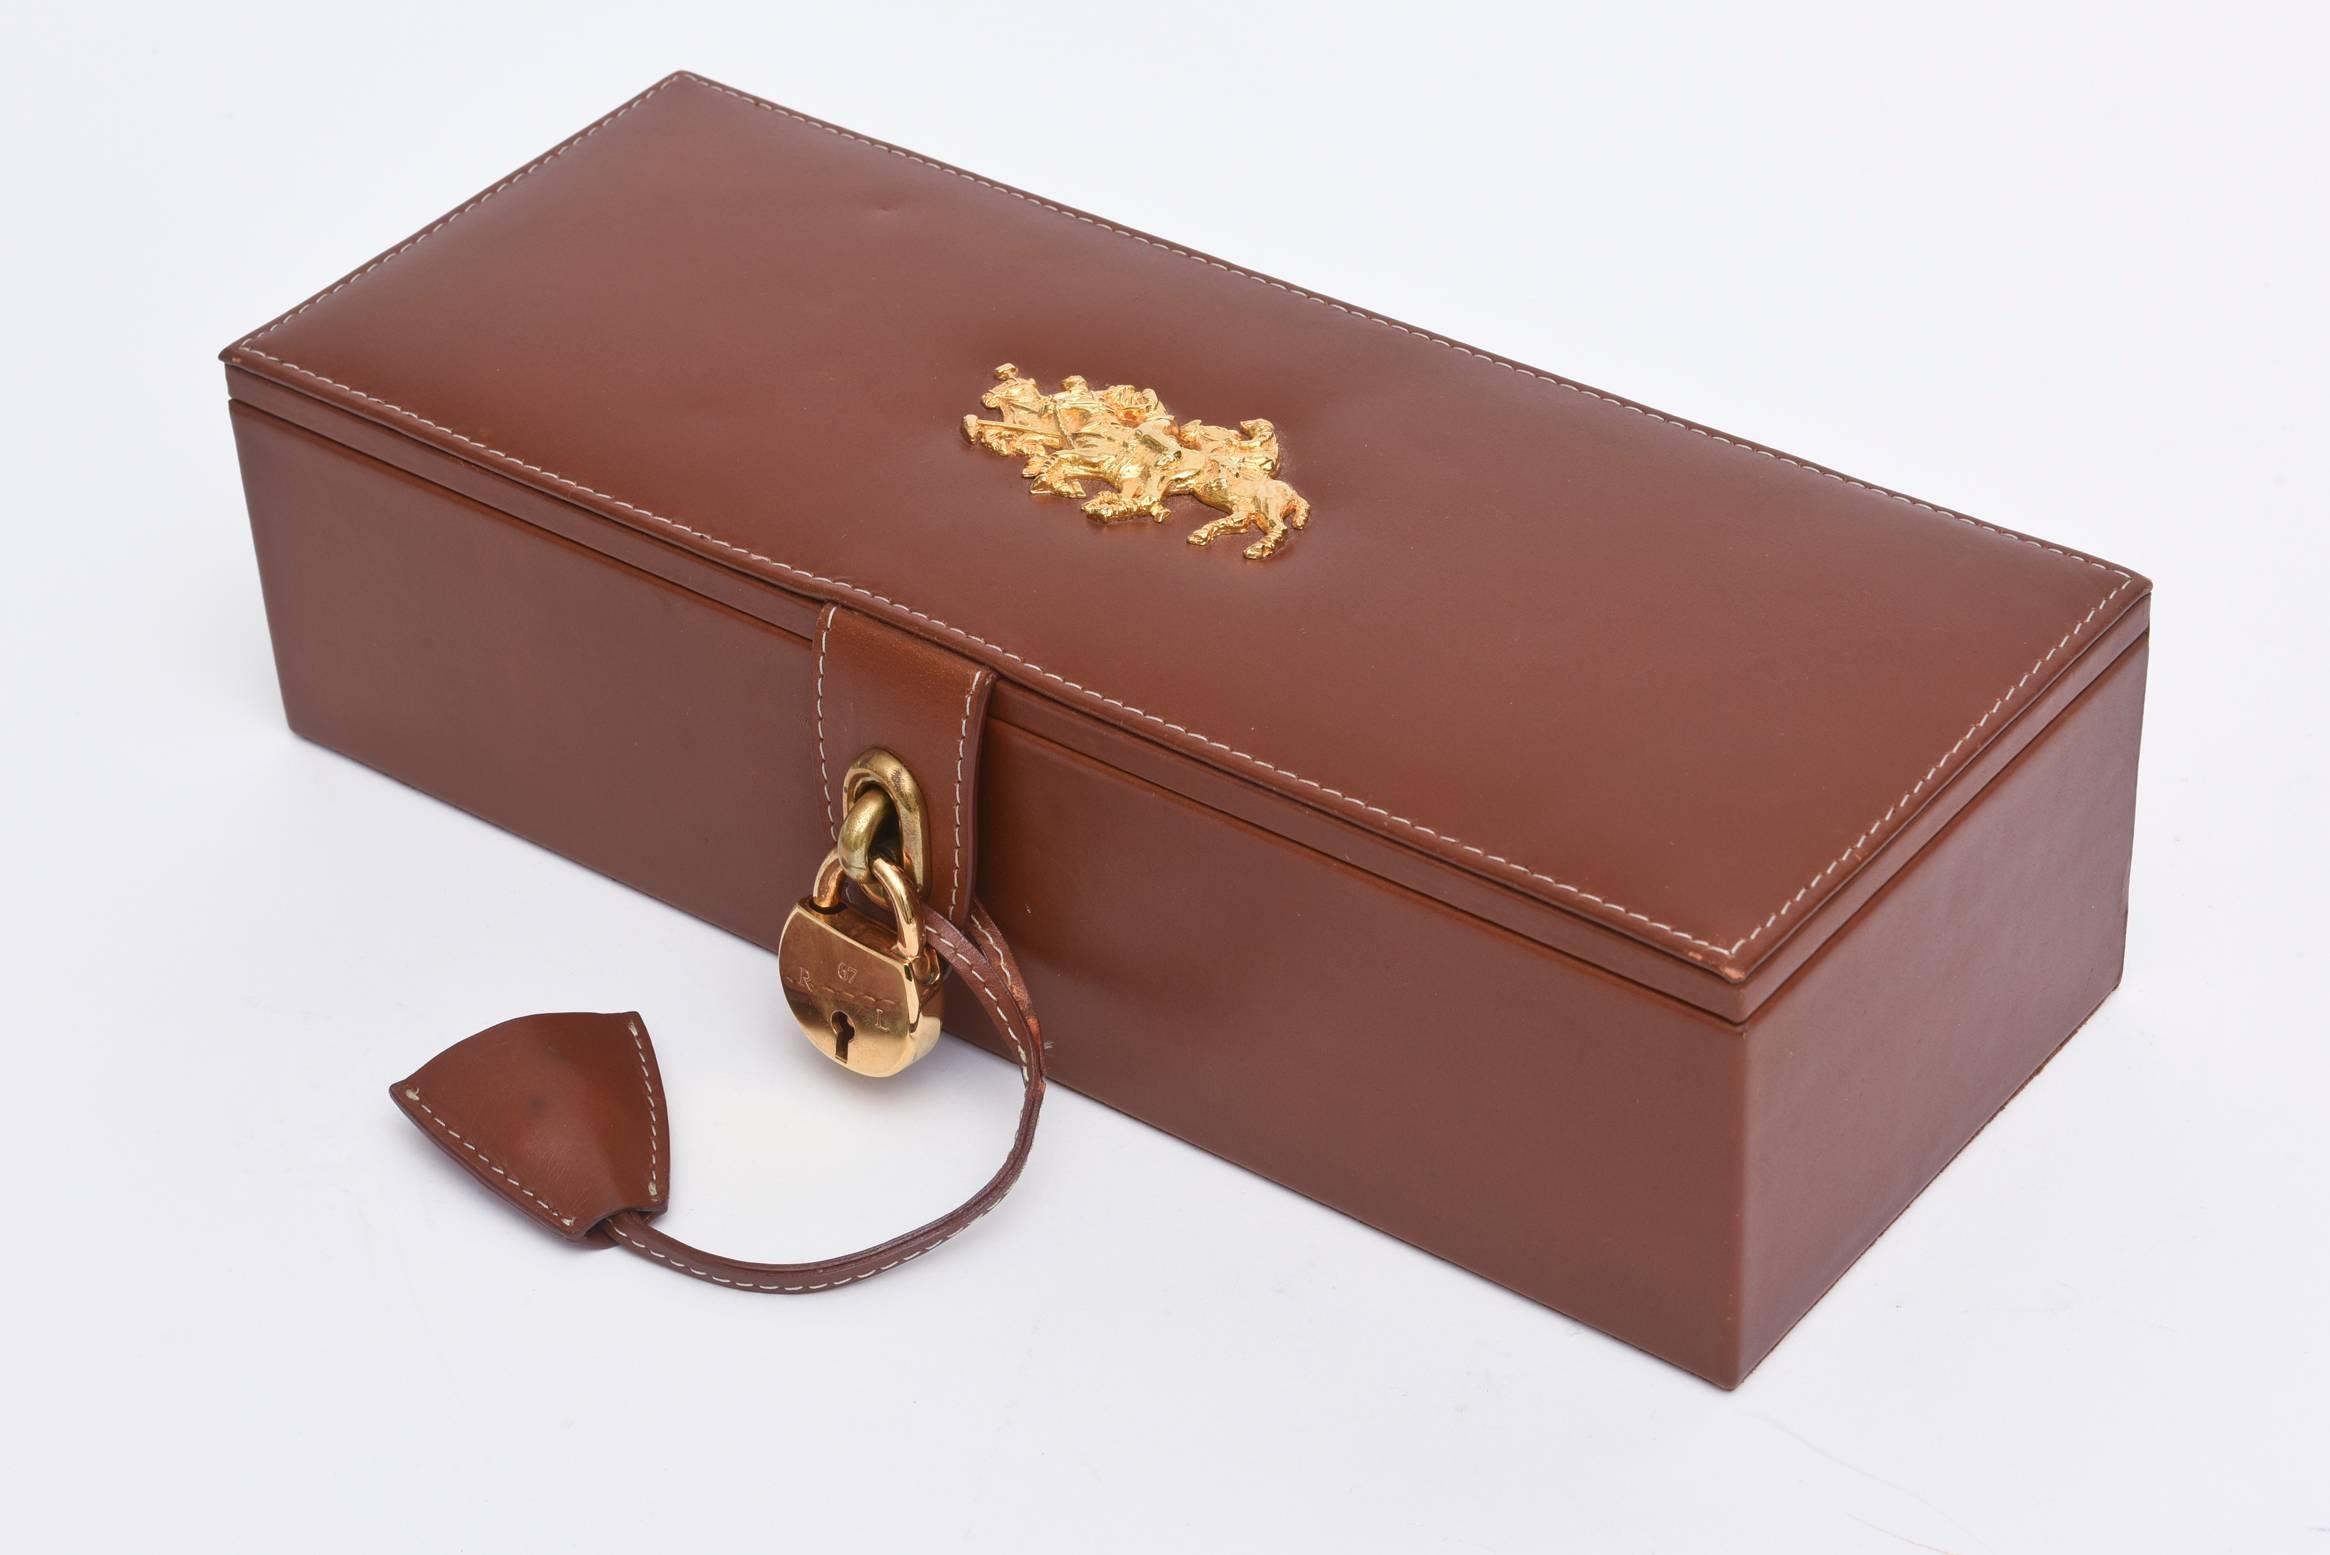 This great supple brown stitched leather box by Ralph Lauren has gold-plated hardware of the design of a polo match. It has a lock and two keys housed inside the leather pouch. It houses five watches, be it vintage or modern. For the watch collector